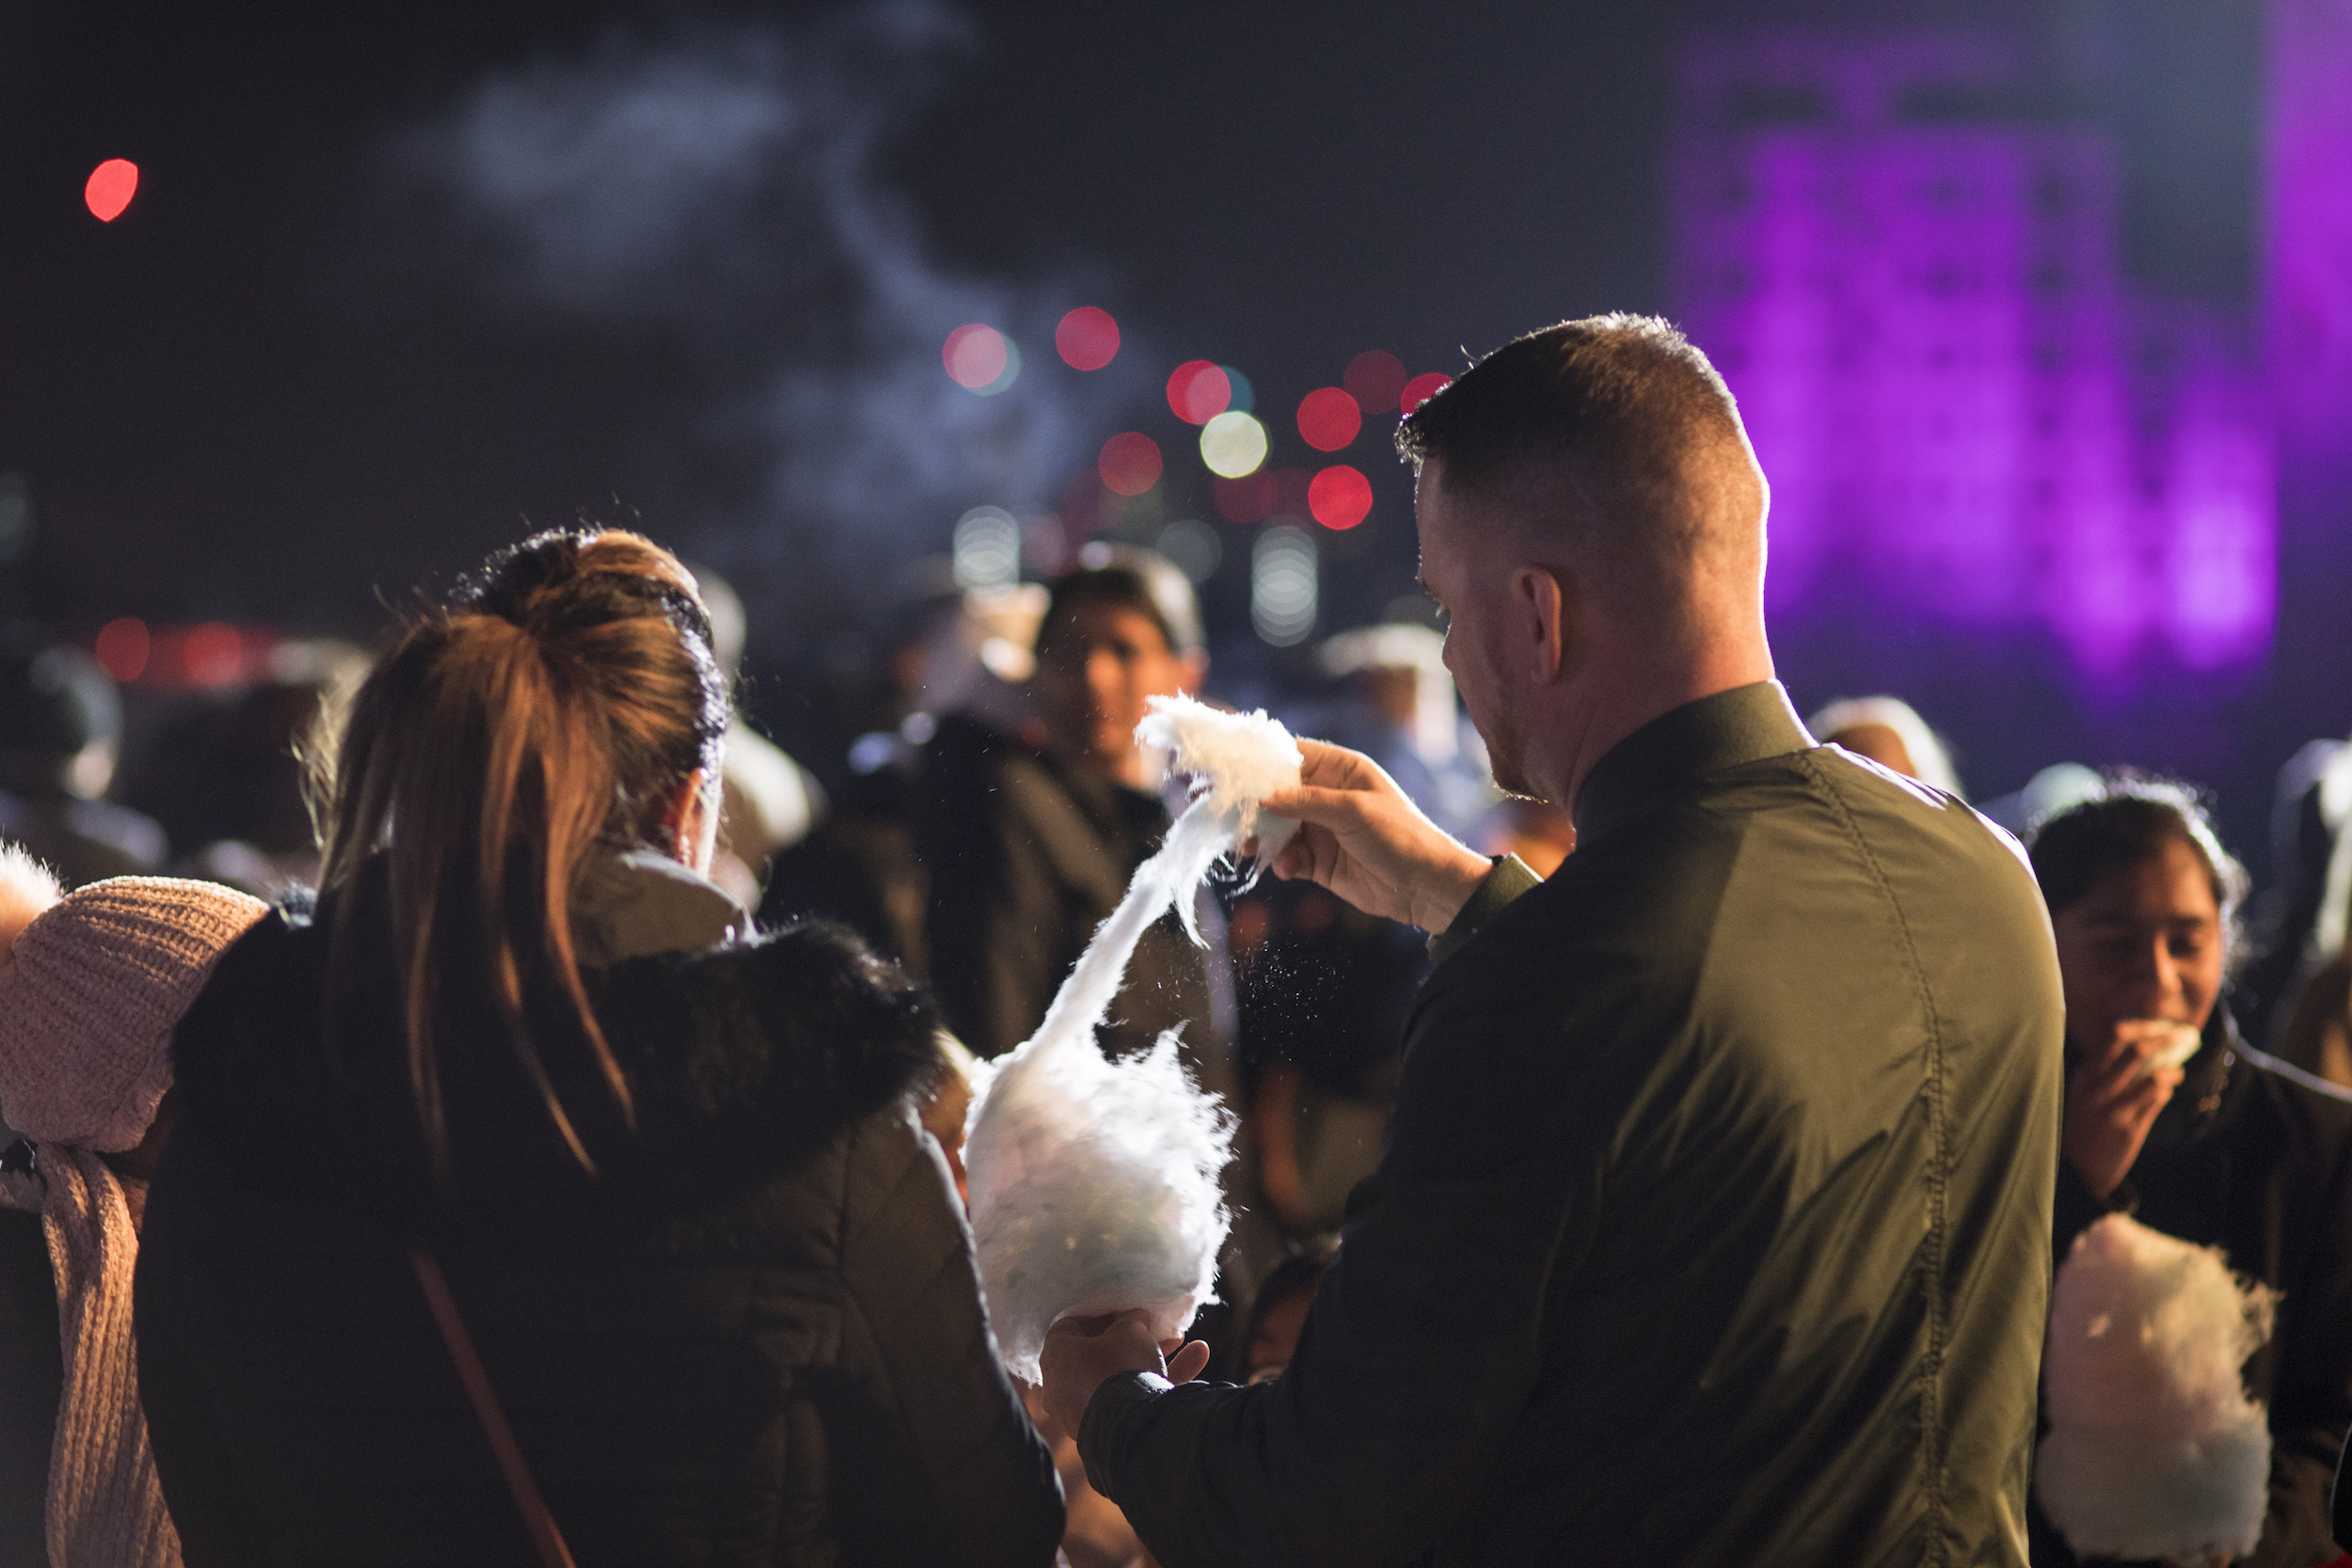 Two people enjoying candy floss